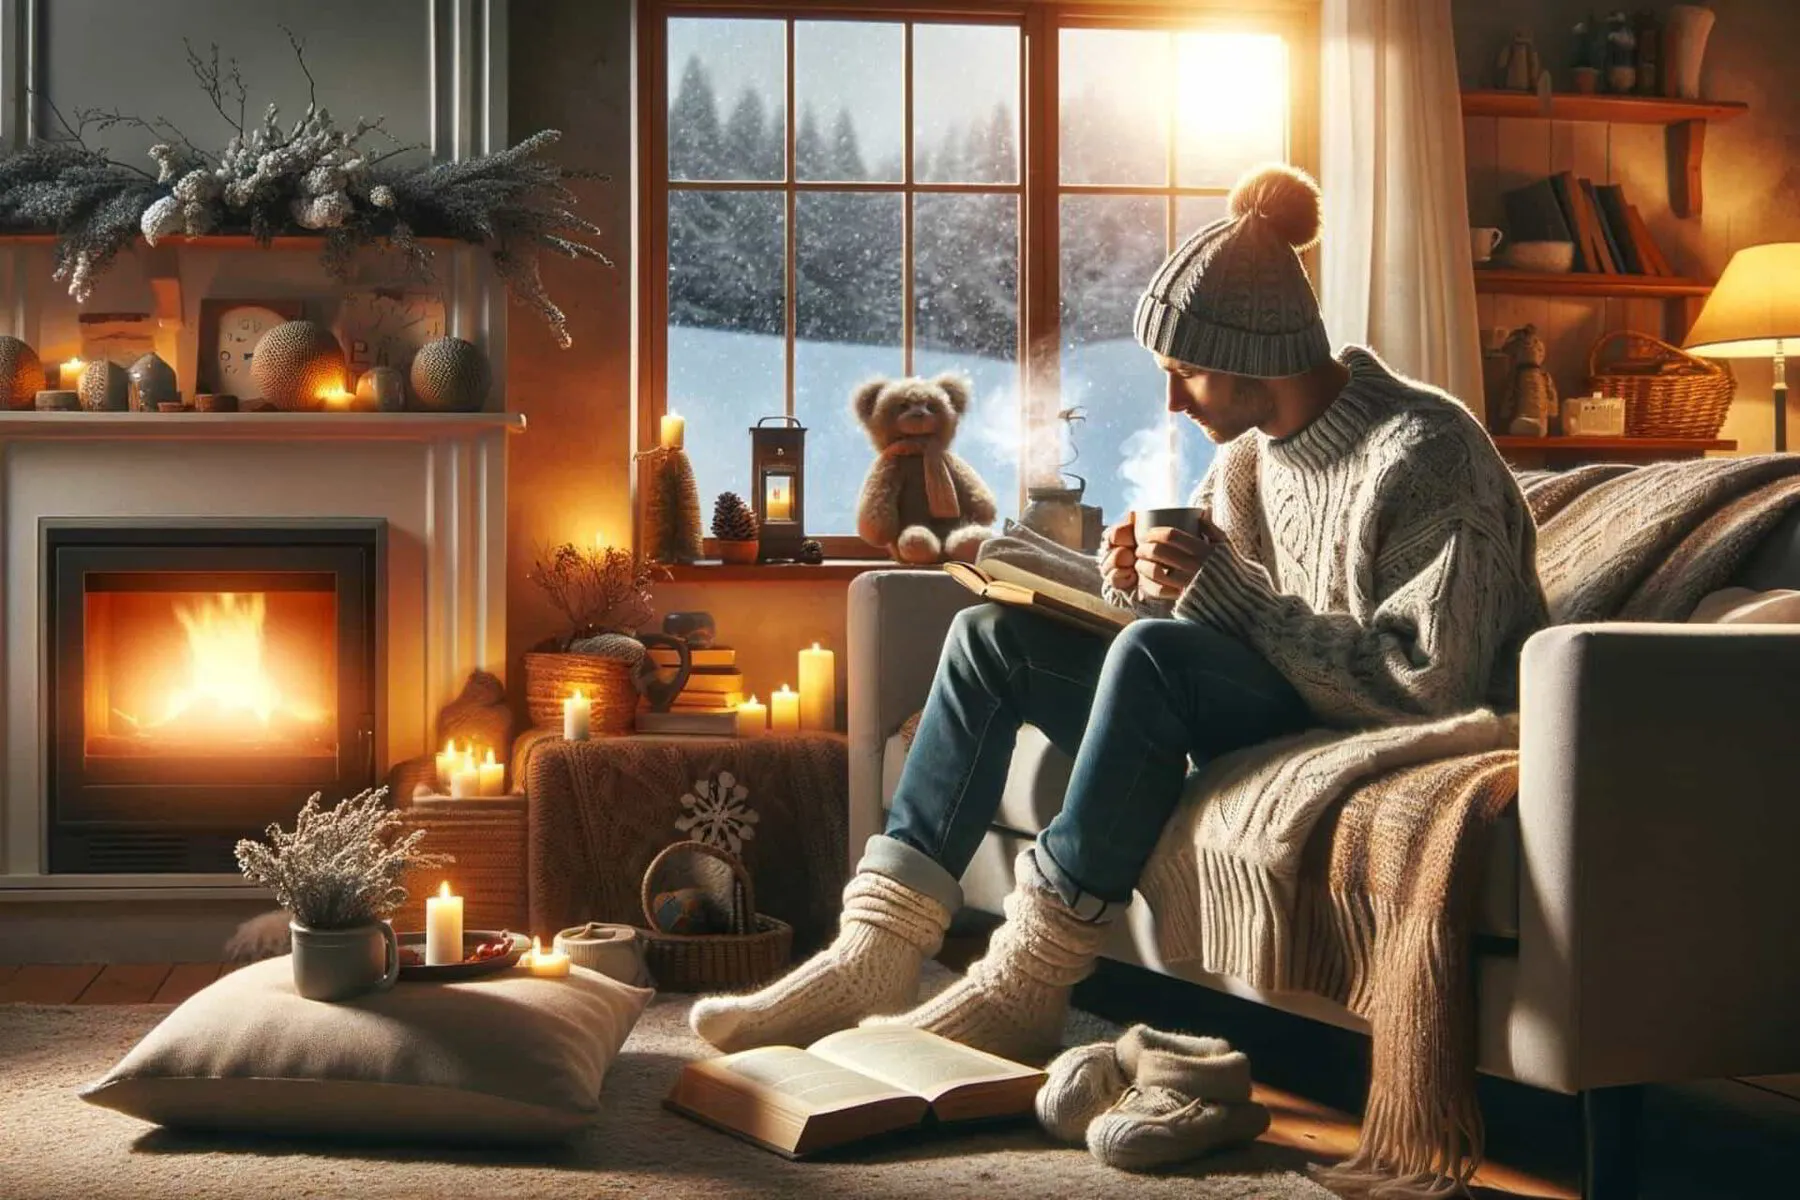 cozy winter scene featuring a homeowner sitting comfortably on a plush couch, enveloped in warmth